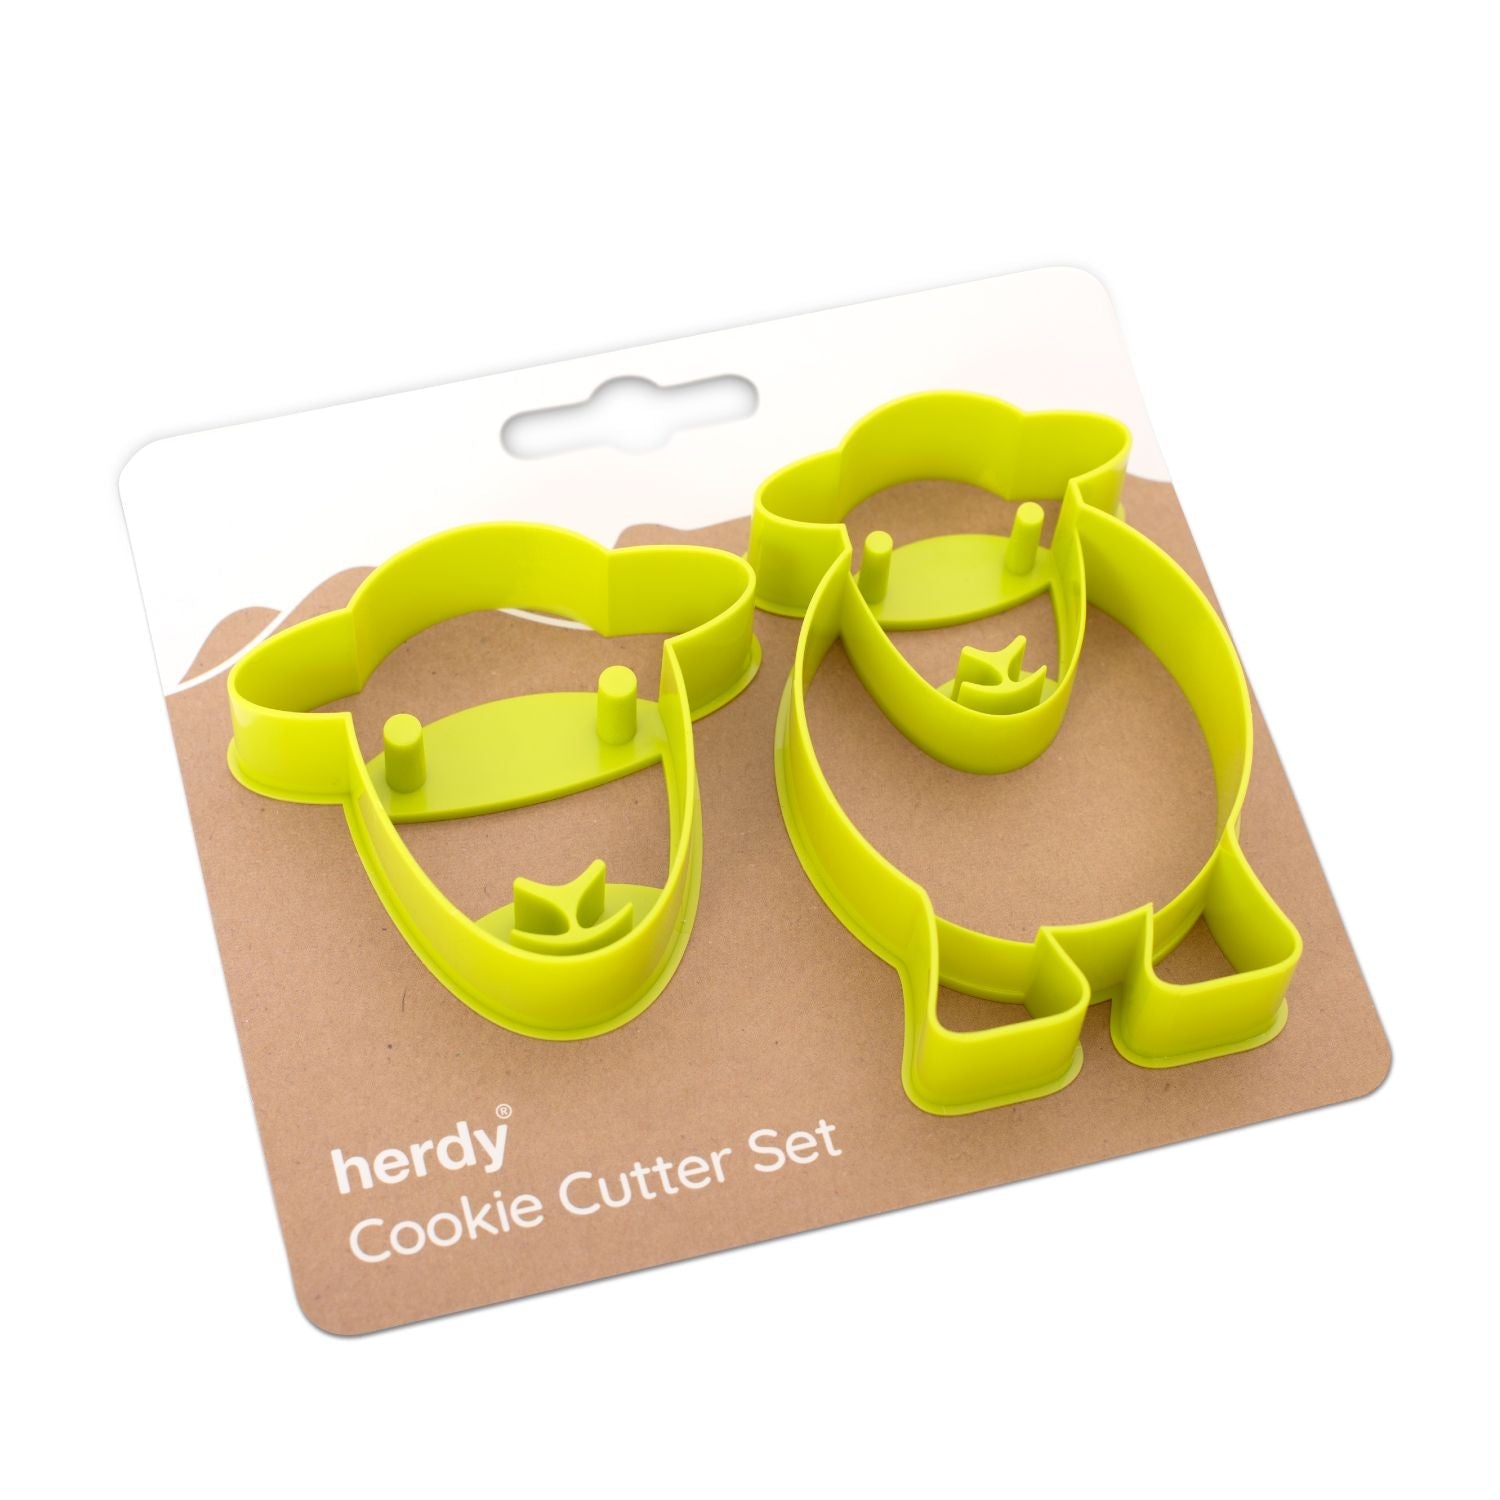 Herdy - Cookie Cutter Set